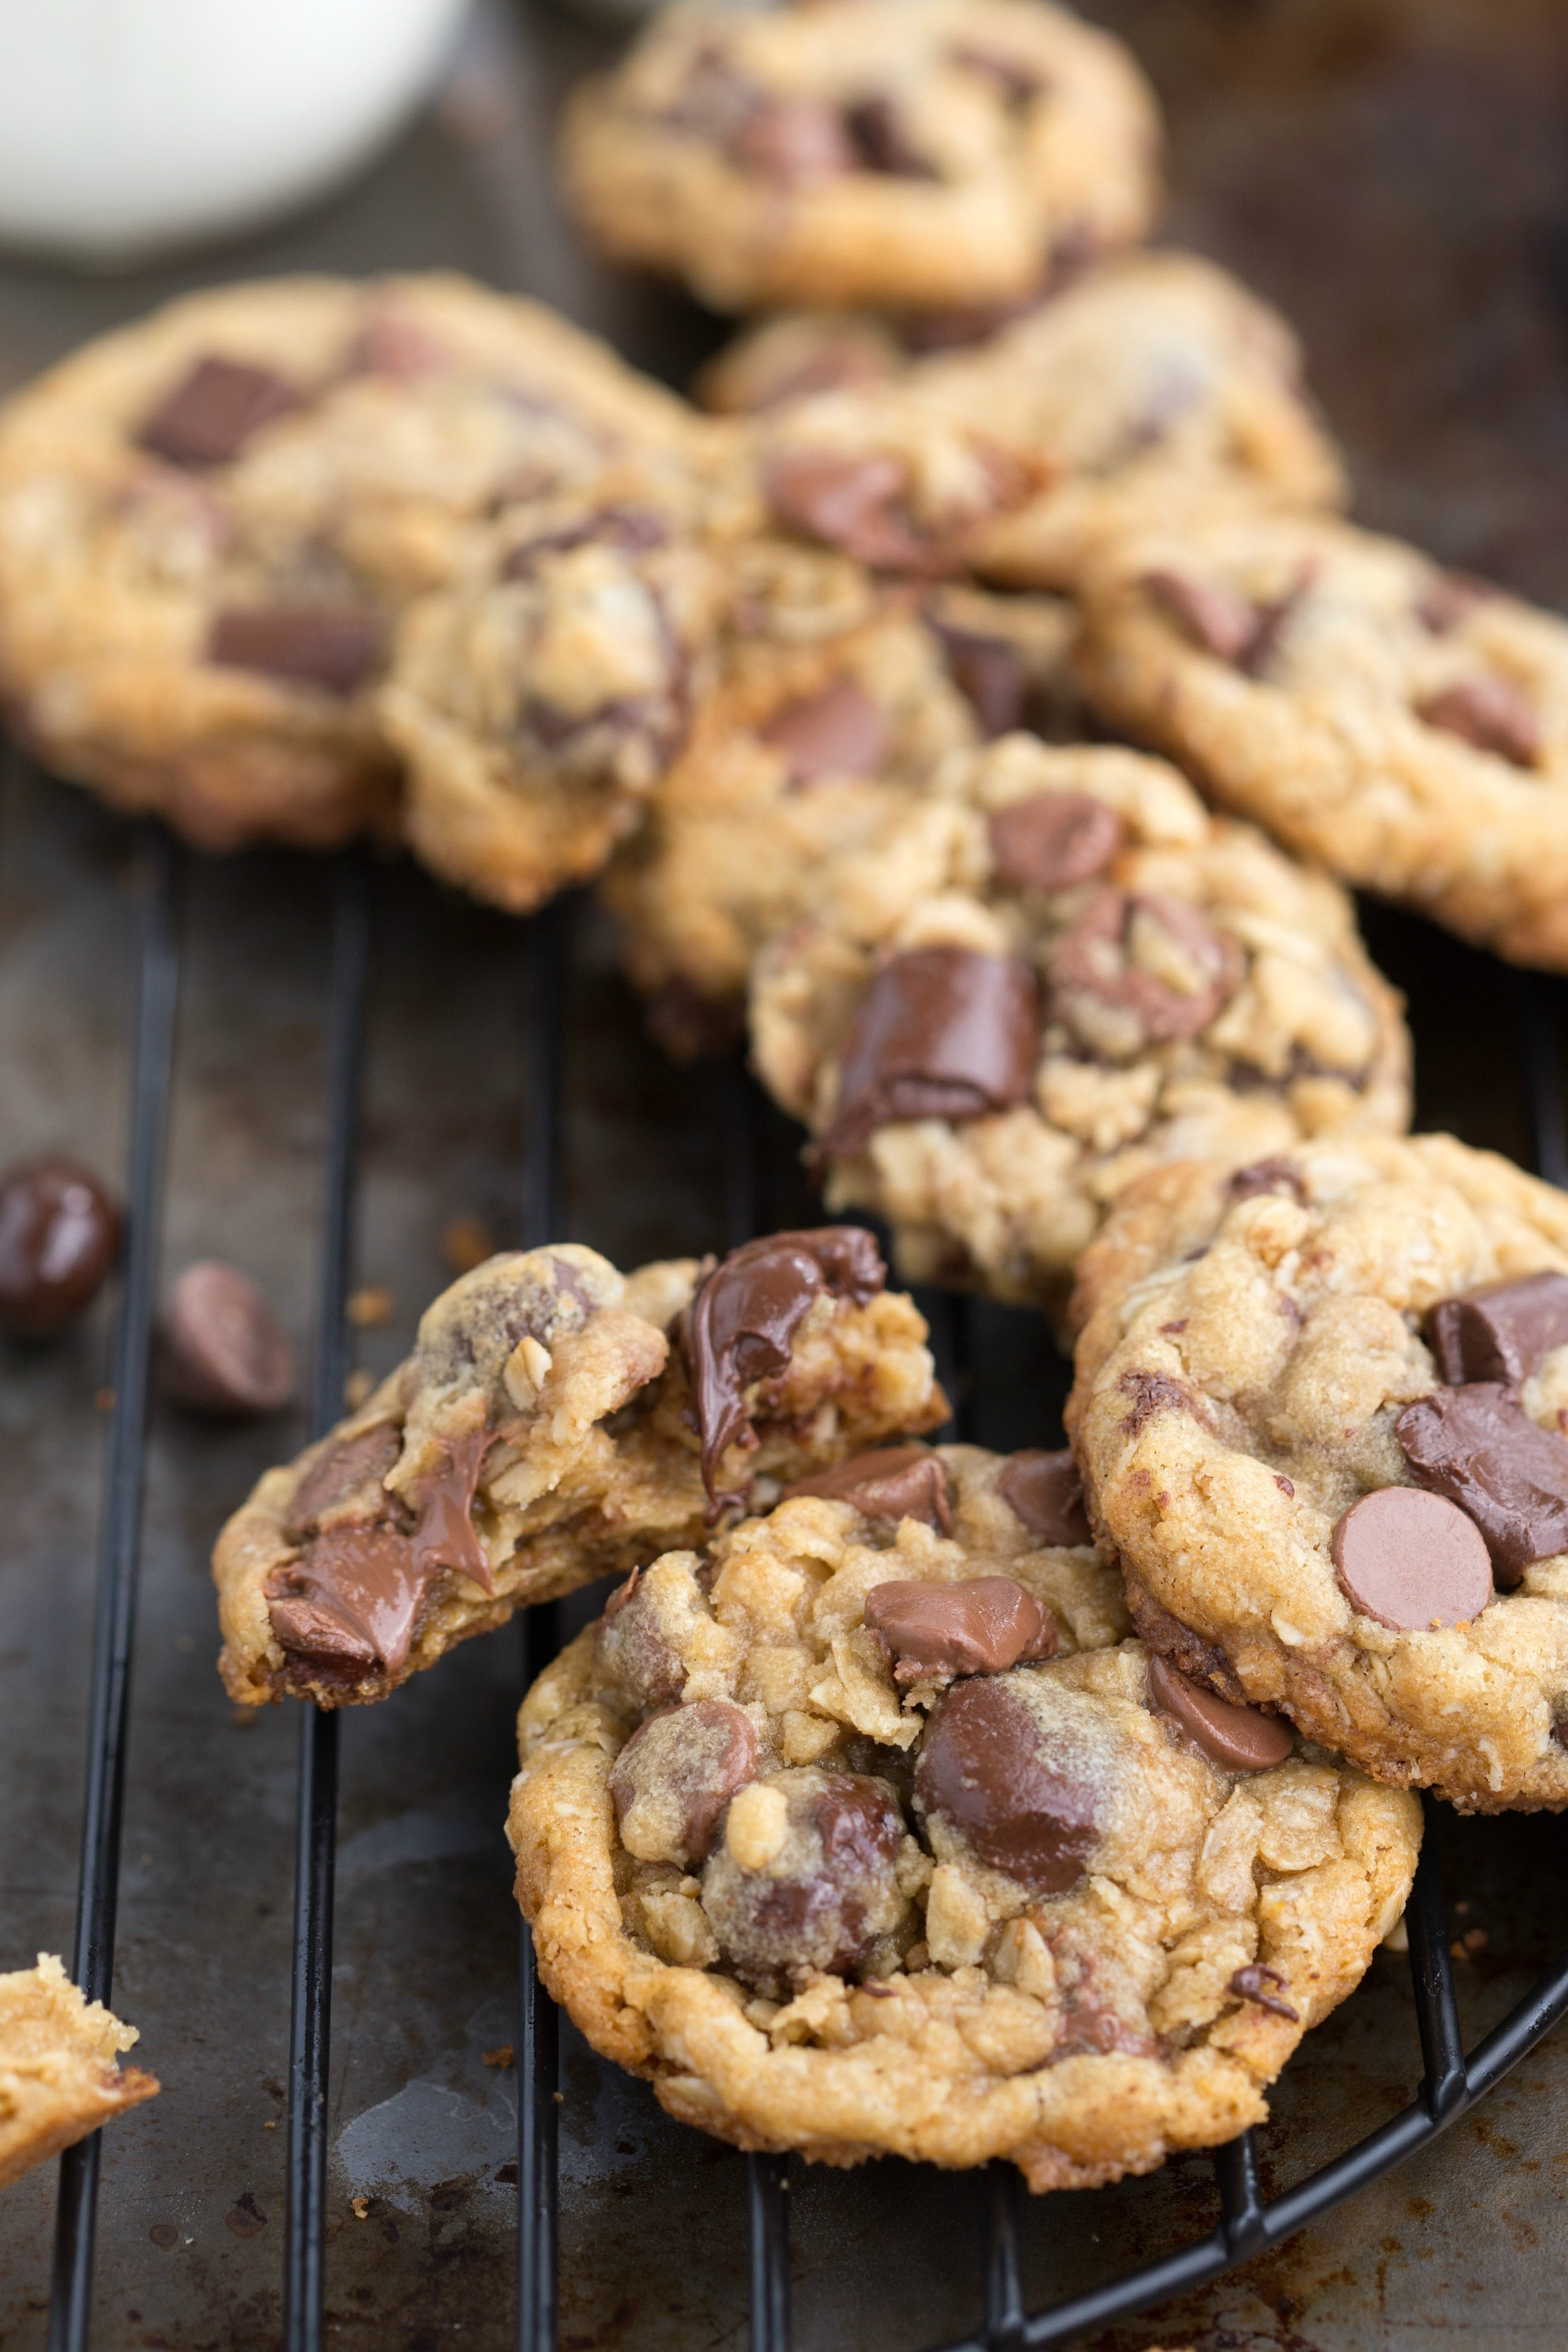 Cocoa Oatmeal Cookies Healthy
 Healthier Oatmeal Chocolate Chip Cookies with Dark